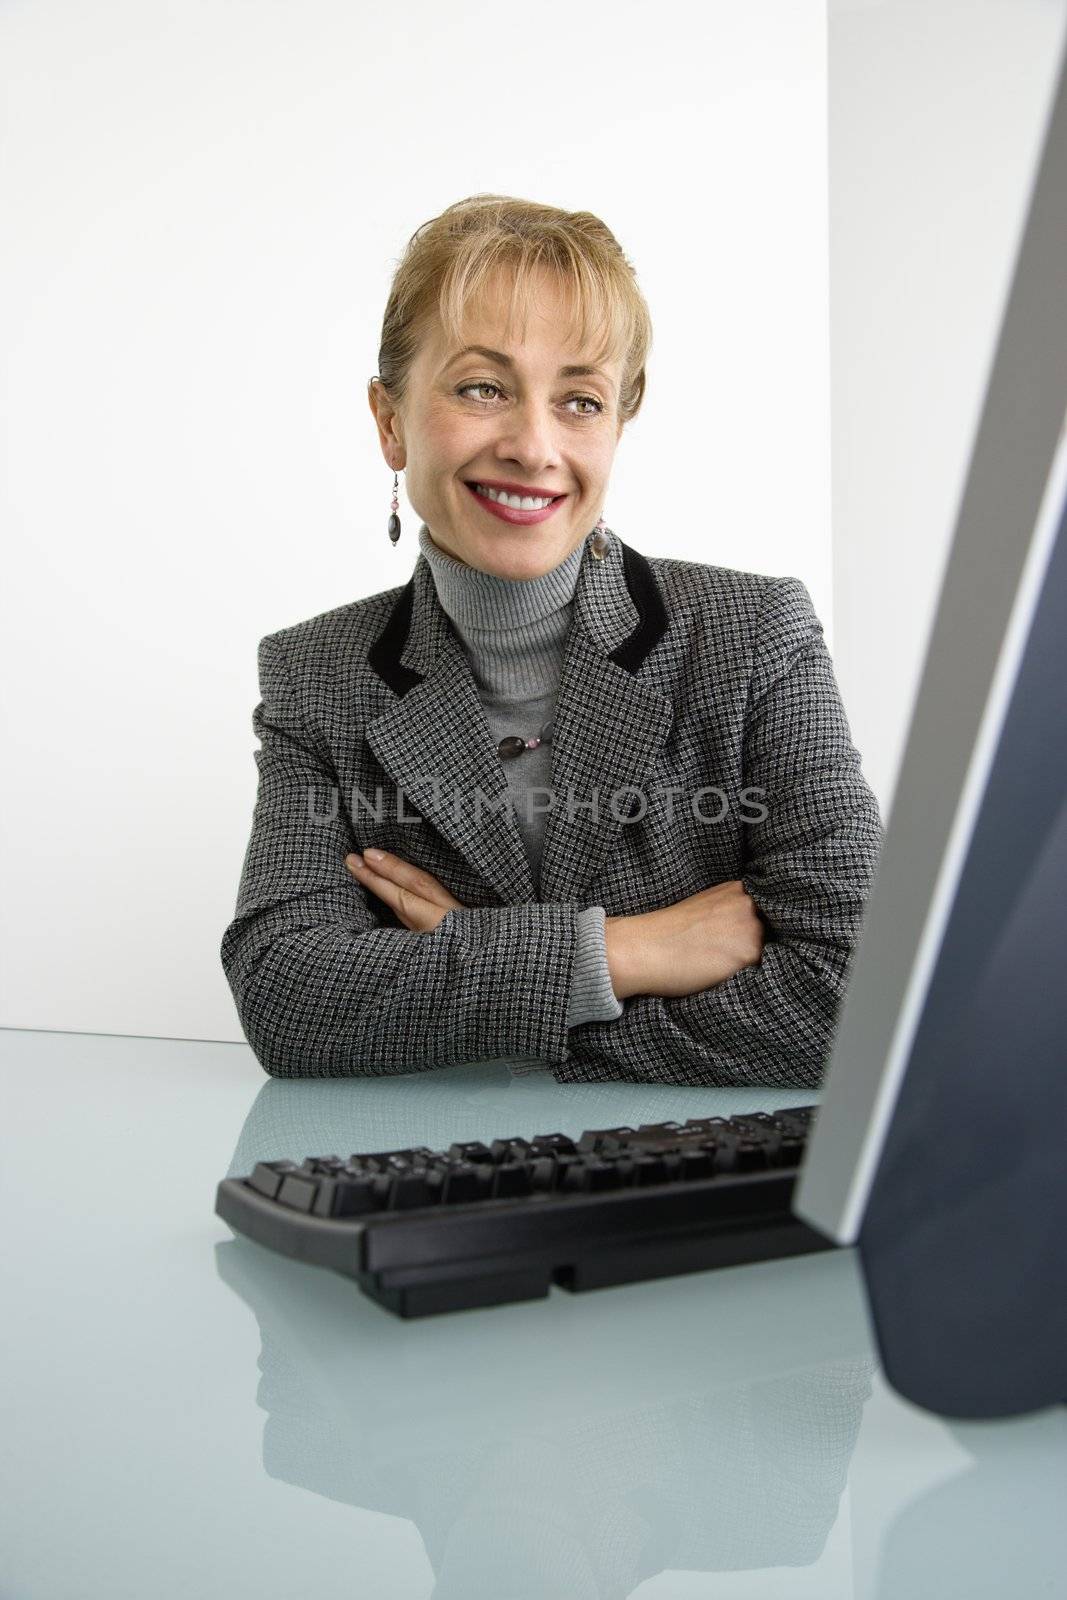 Caucasian woman looking at computer and smiling with arms crossed.